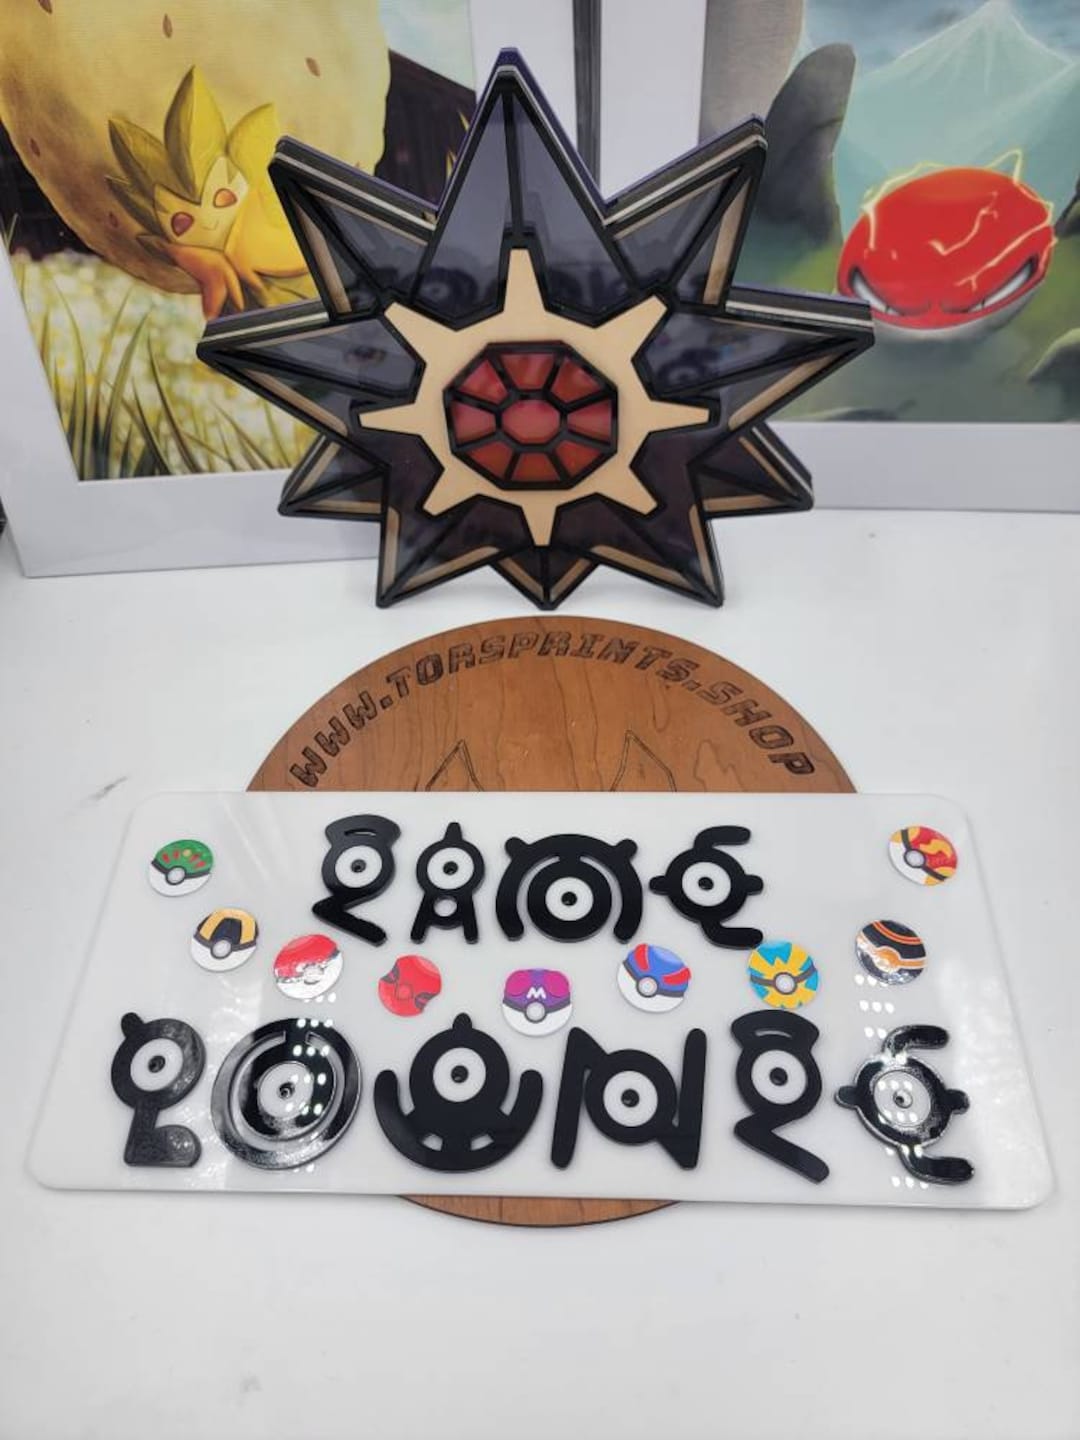 Pokemon Unown Frame Custom Name Protected With Glass -  Israel